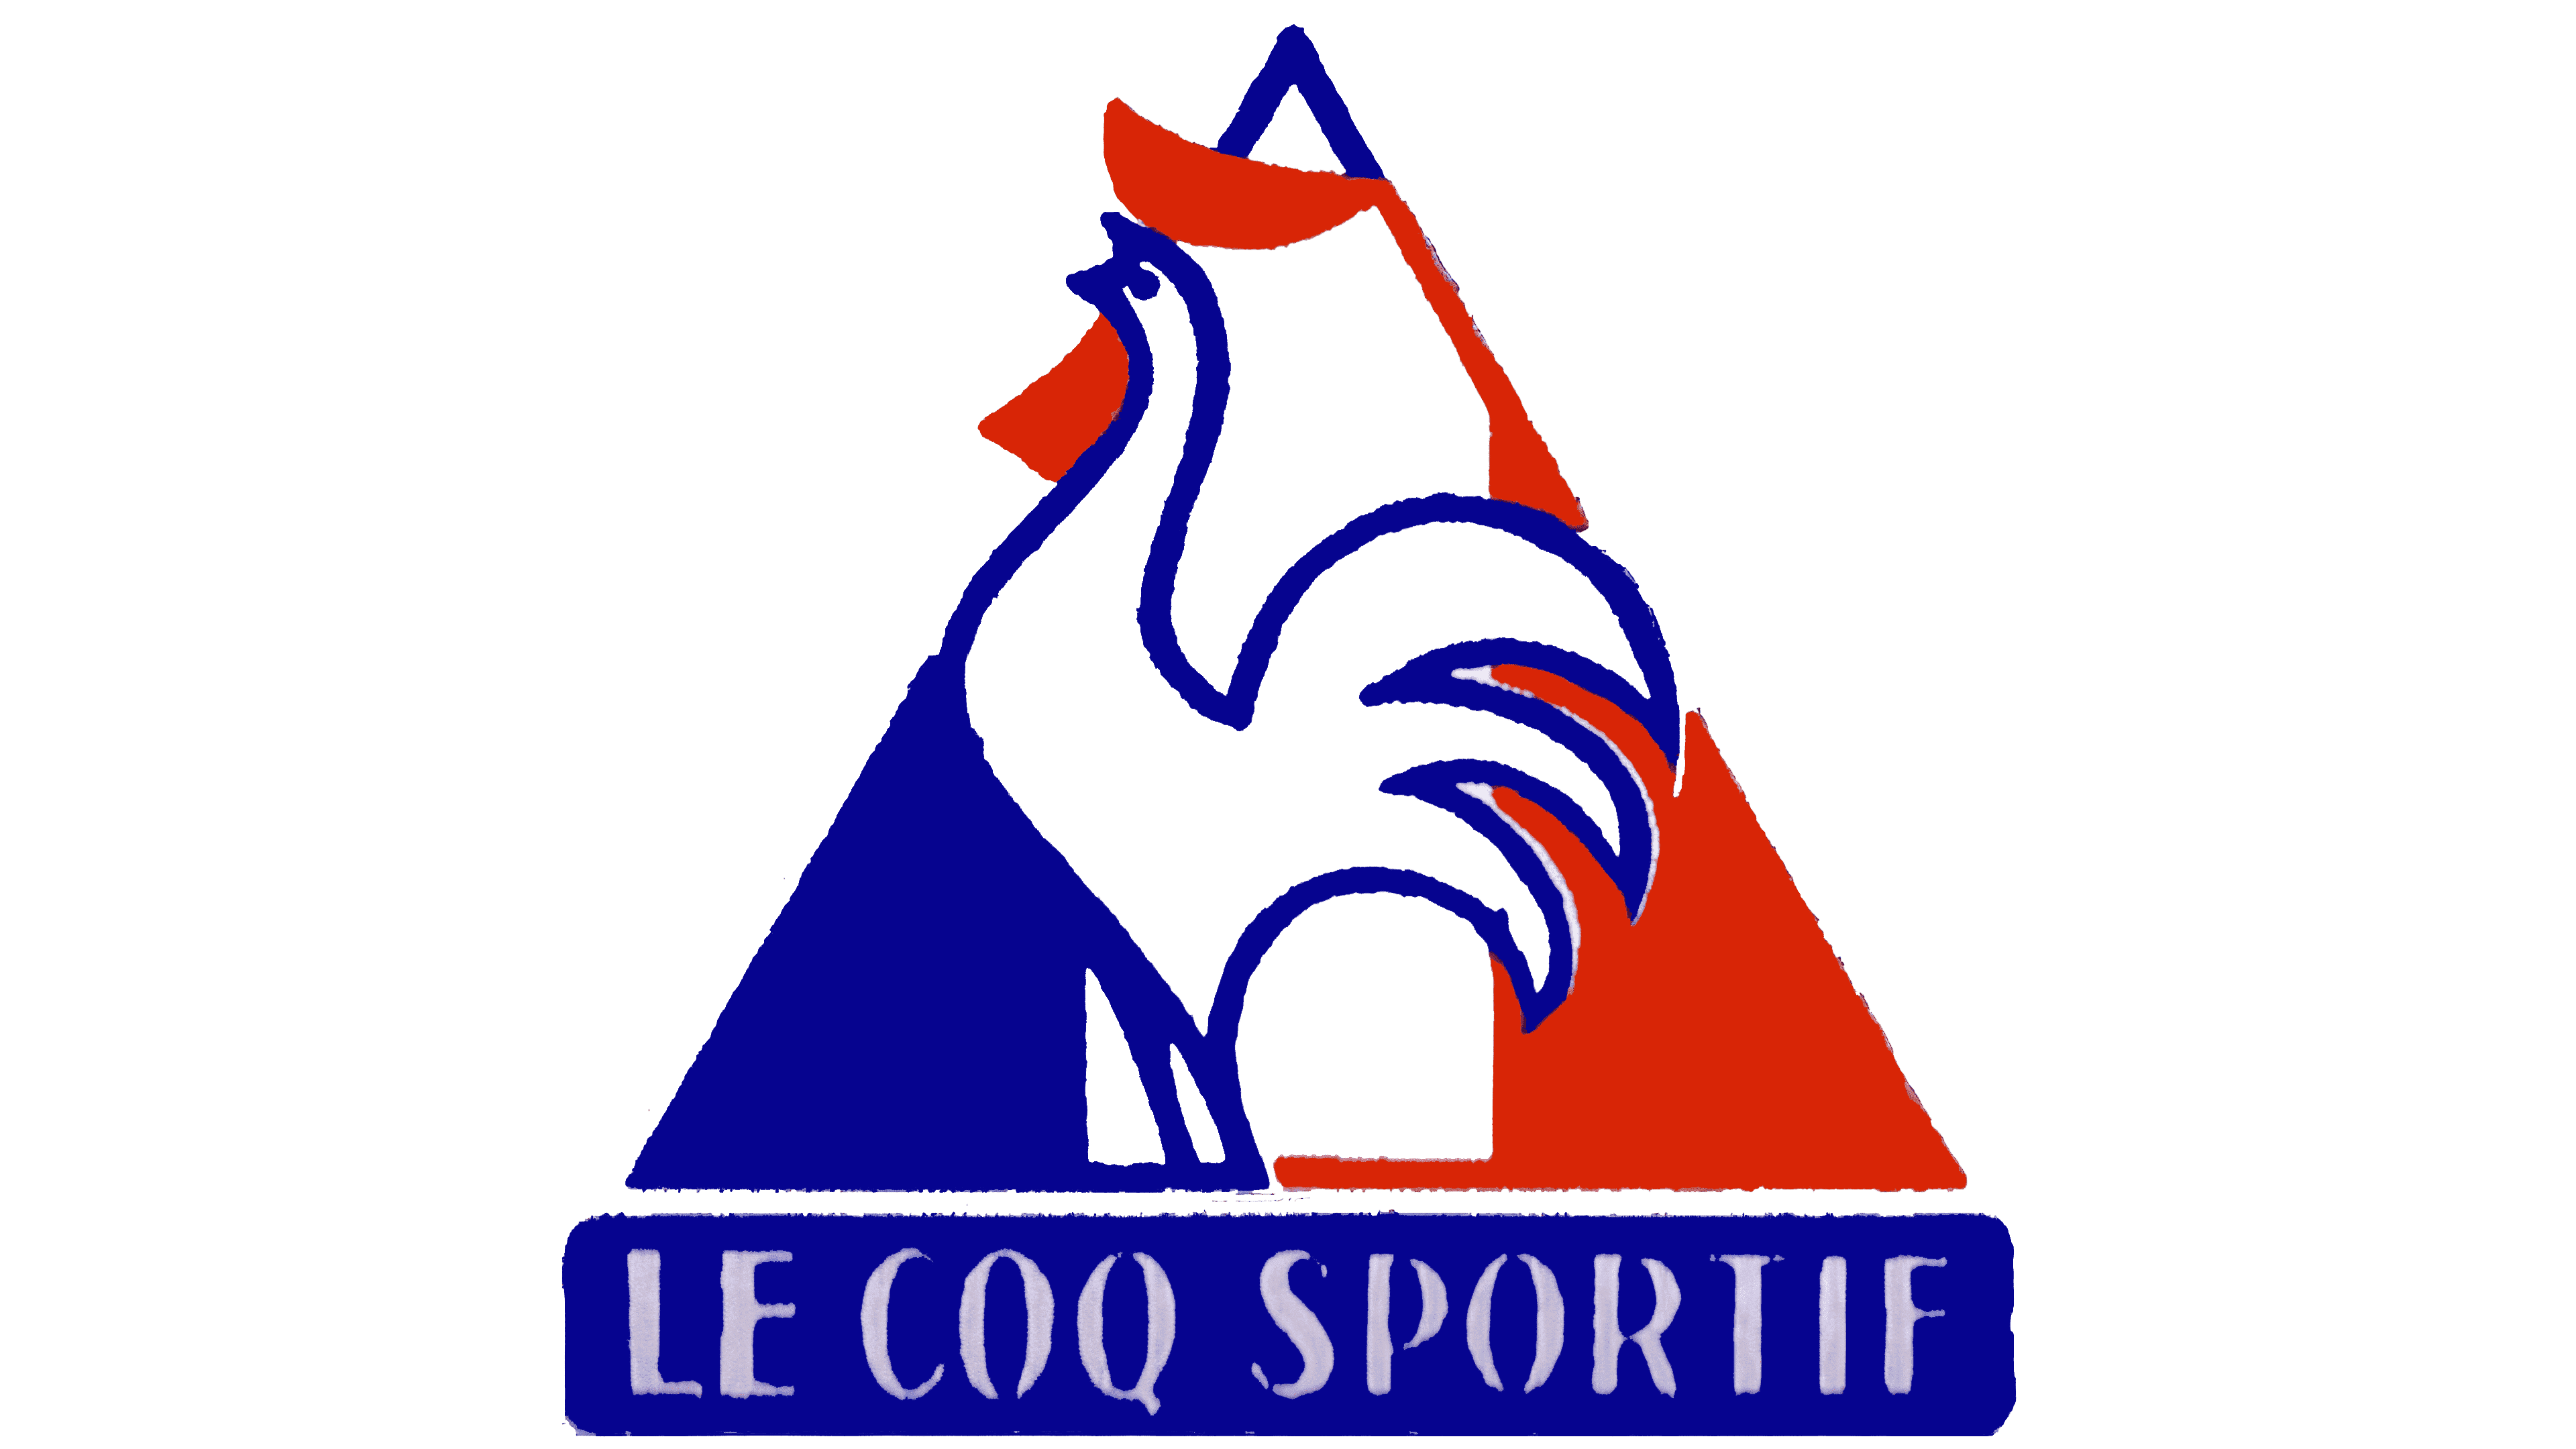 Le Coq Sportif Logo, Symbol, Meaning, History, PNG, Brand | vlr.eng.br